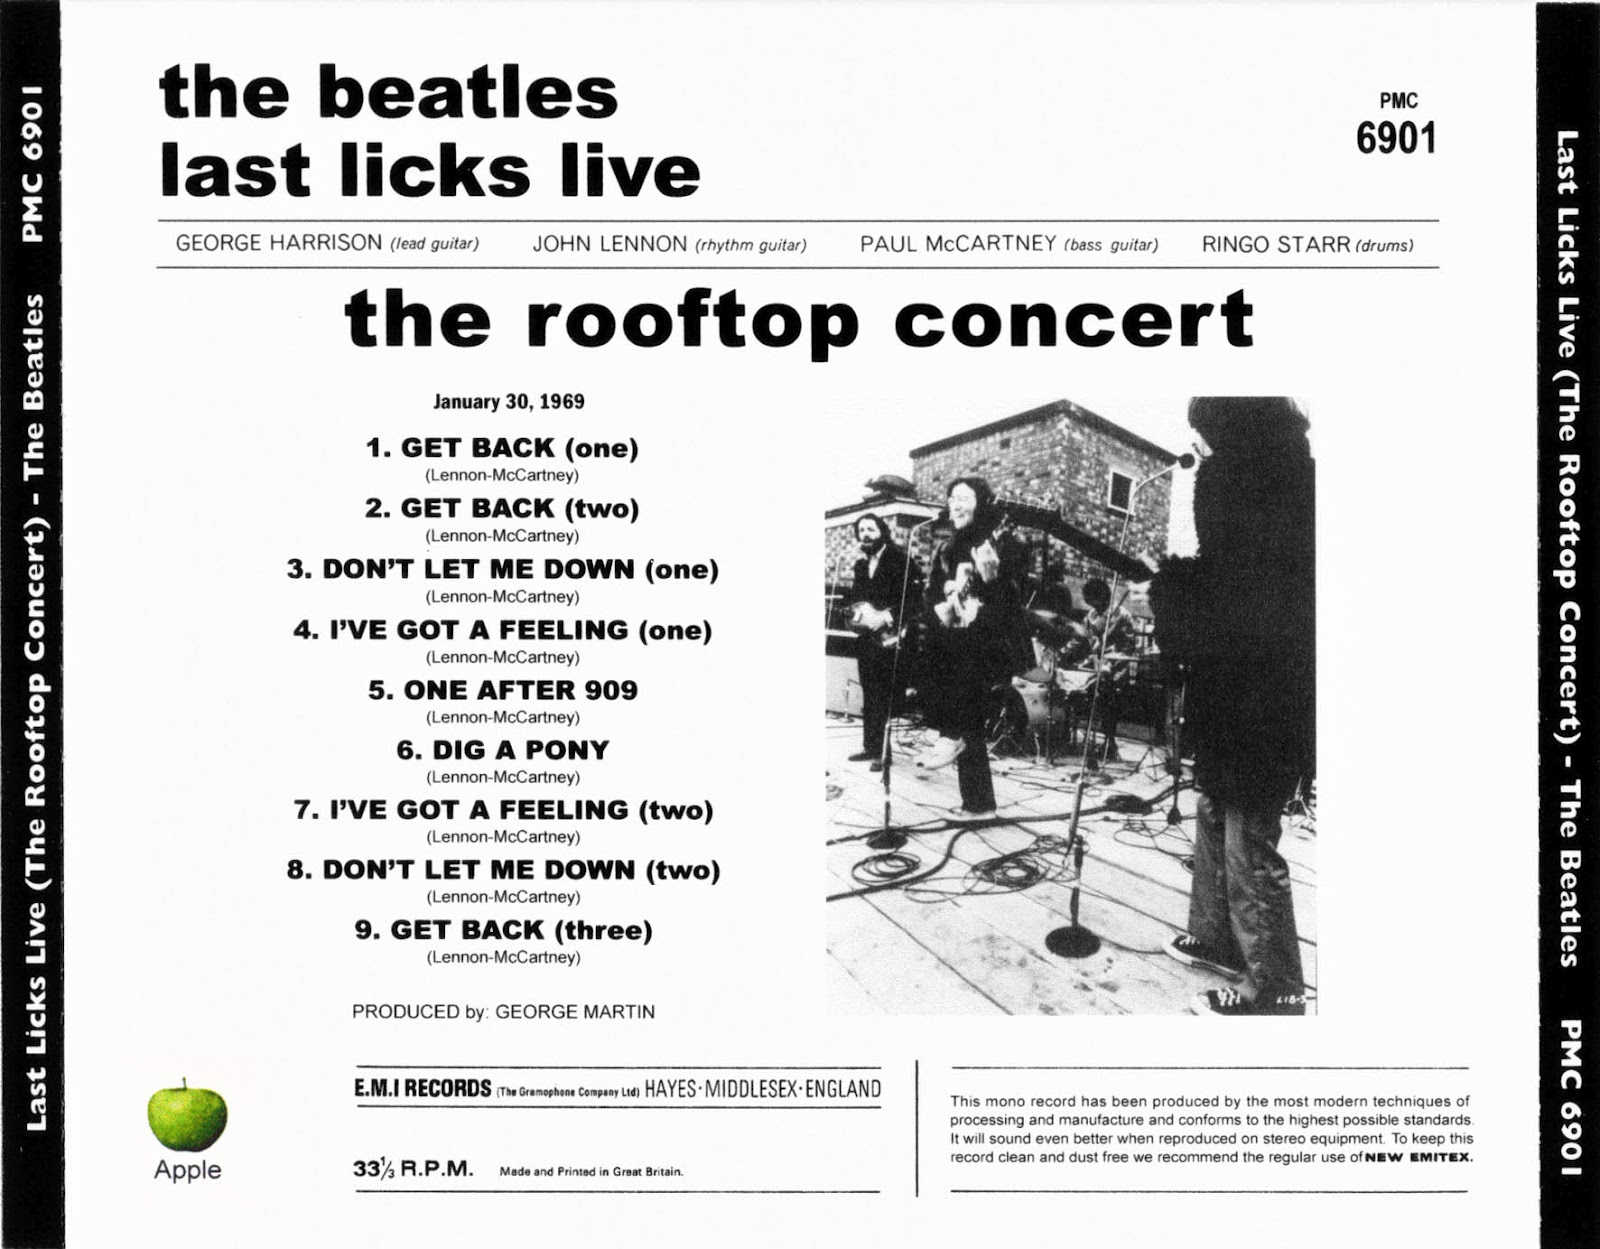 Let get backing. The Beatles Rooftop Concert 1969. Get back the Rooftop Performance 2022 Beatles. Beatles Rooftop Concert. The Beatles get back.